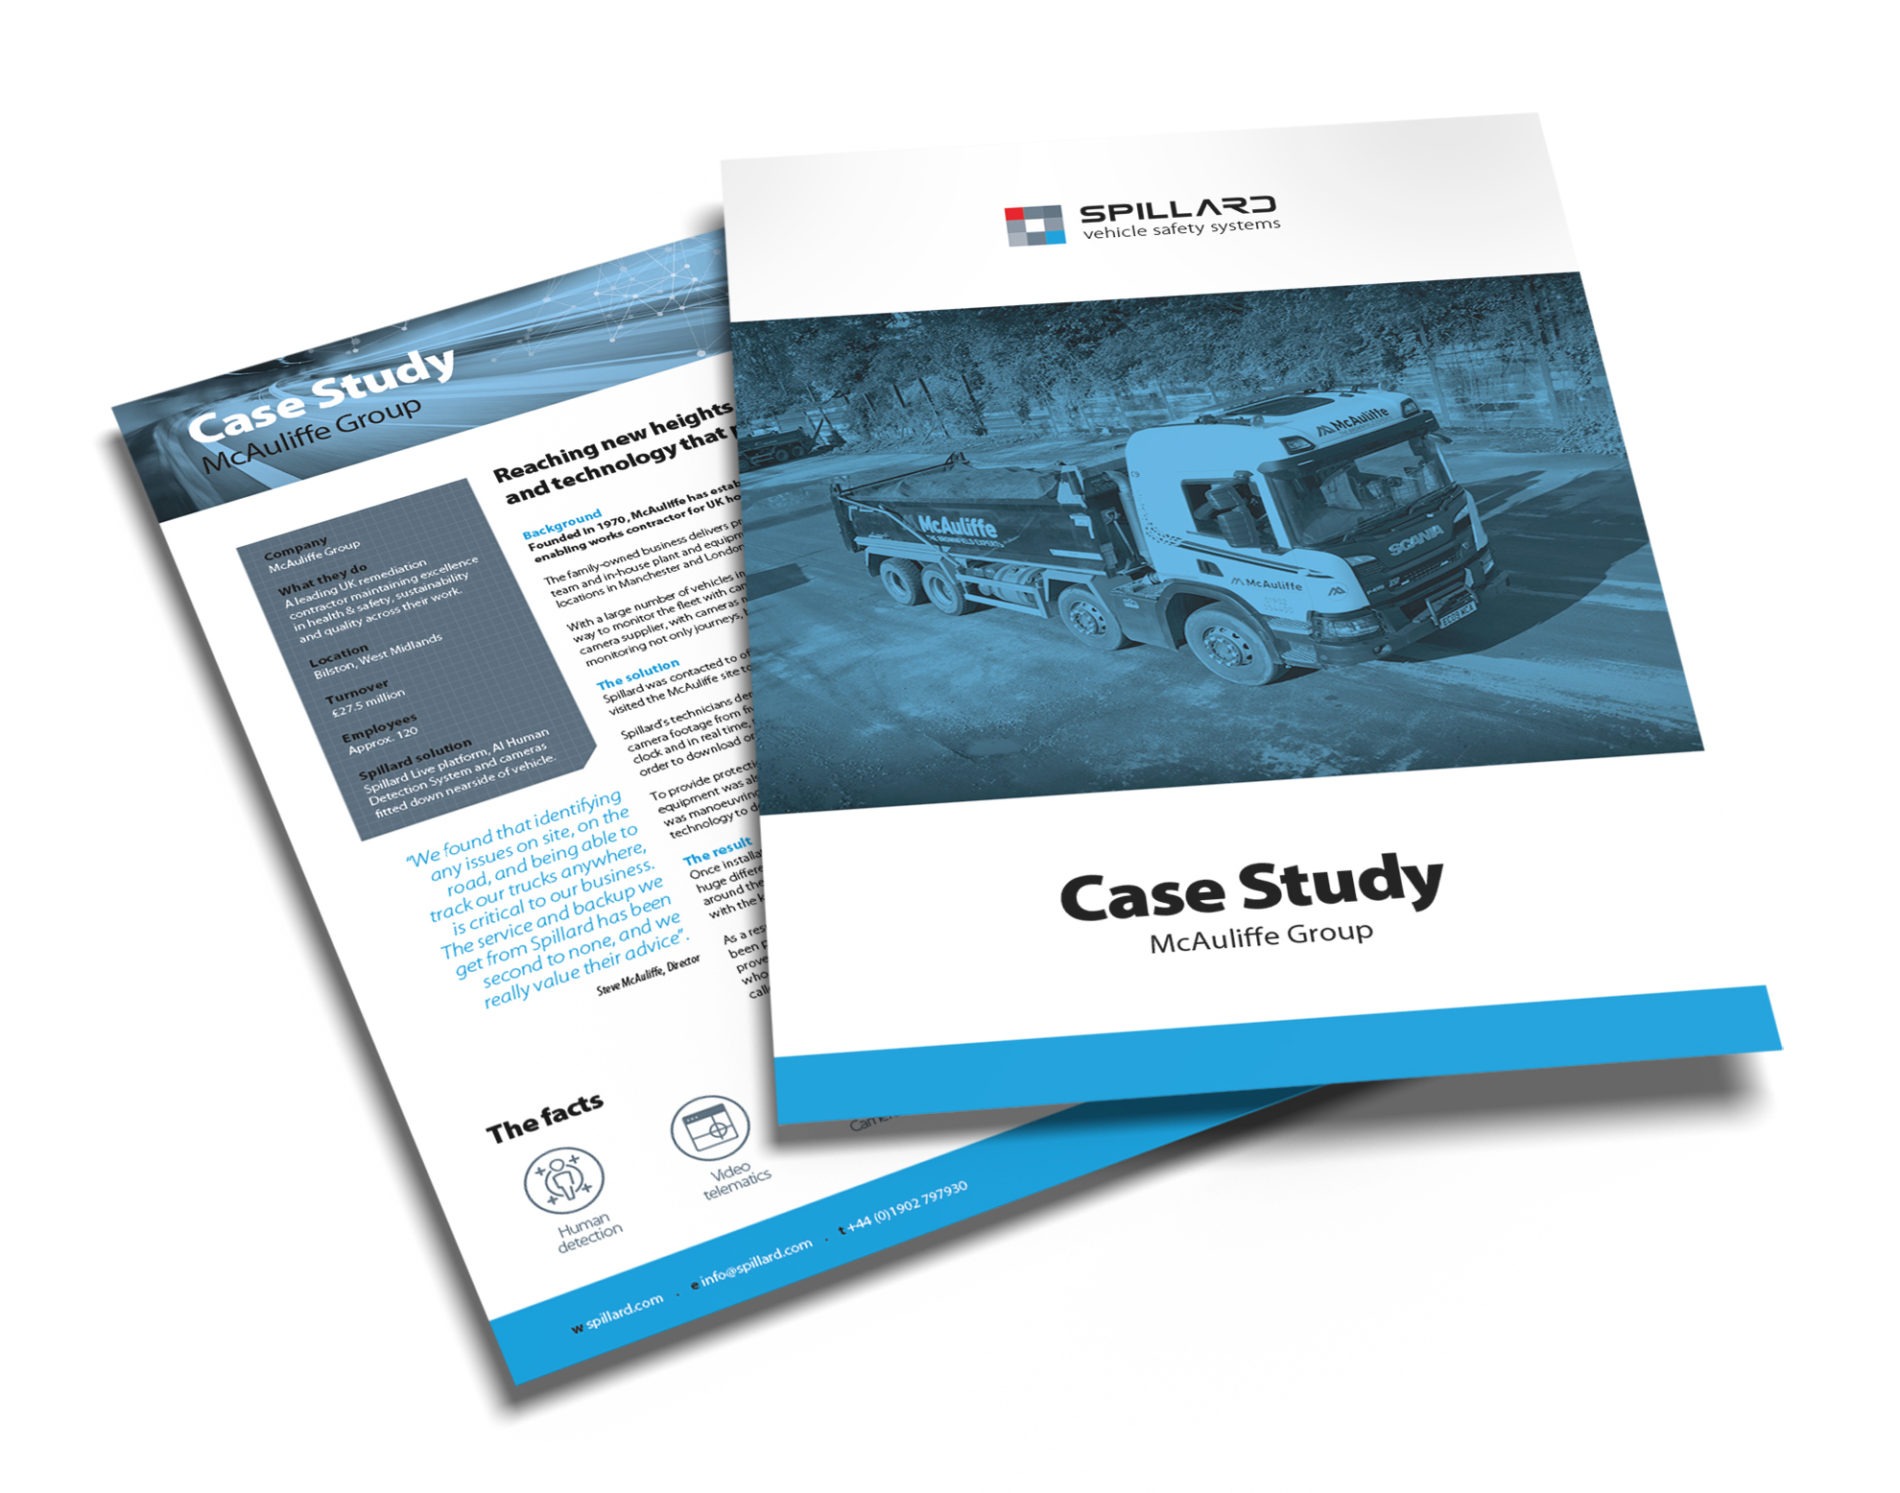 Offering improved visibility to prevent accidents and protect people - SPILL Case study visual mcauliffe